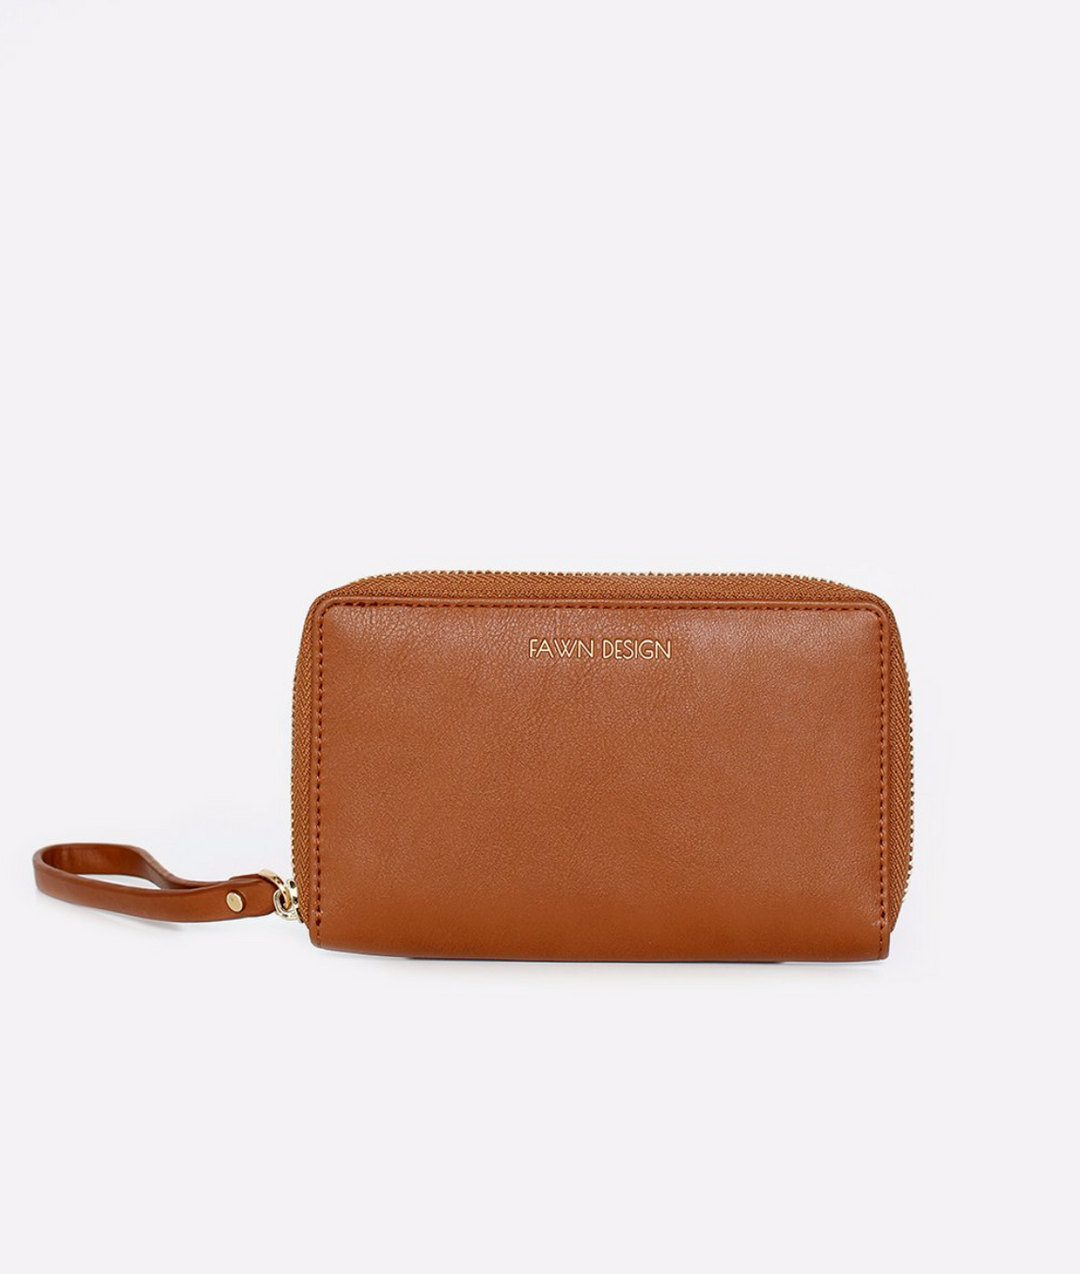 FAWN DESIGN THE WALLET - BROWN